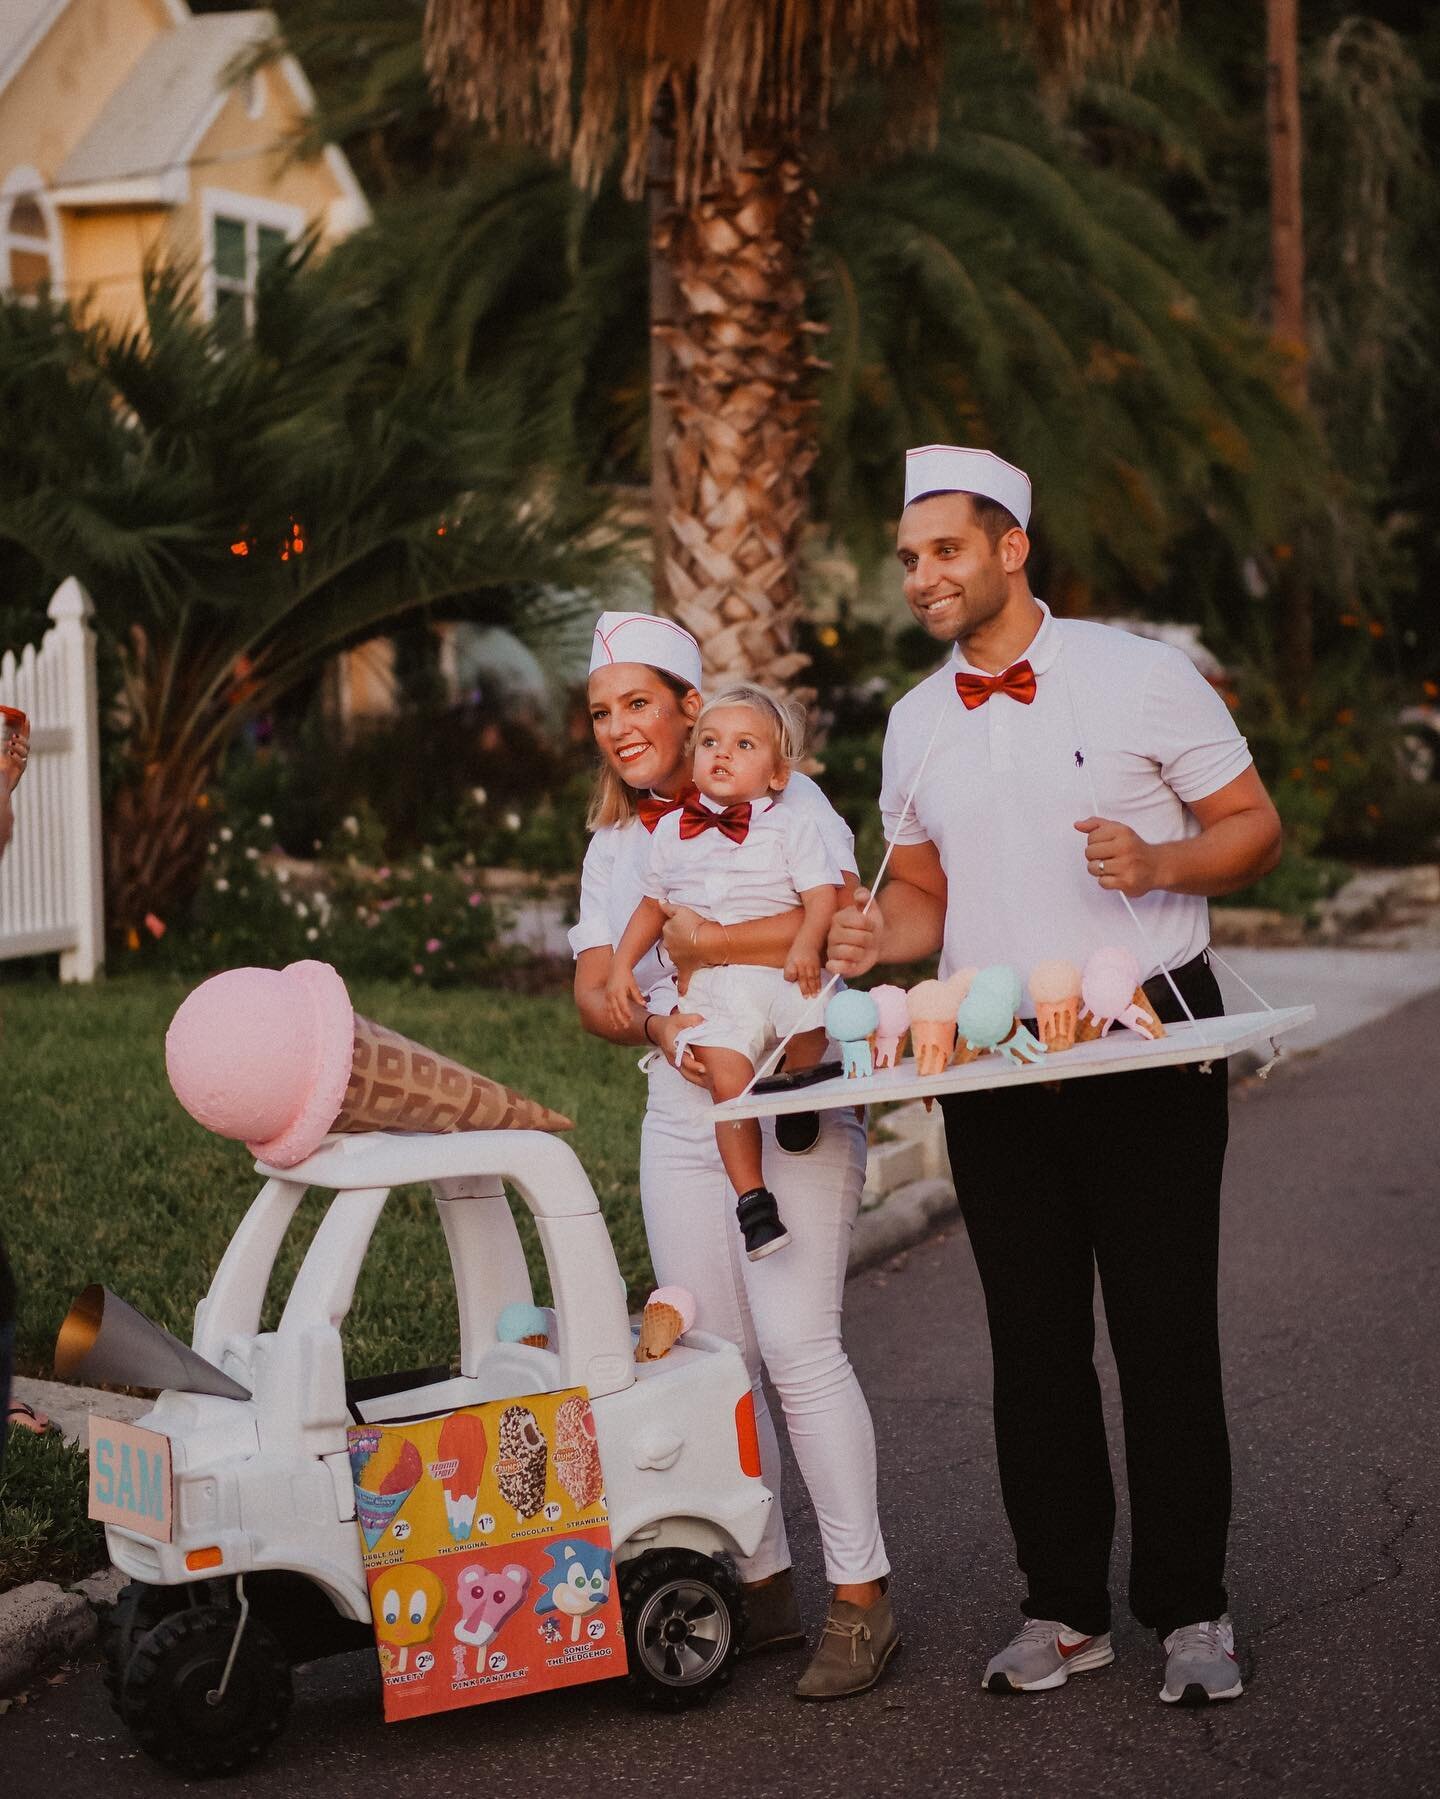 Okay Halloween just became our favorite day for a family session. 🚐 Swipe to smile&gt;&gt;🍦👏🏼